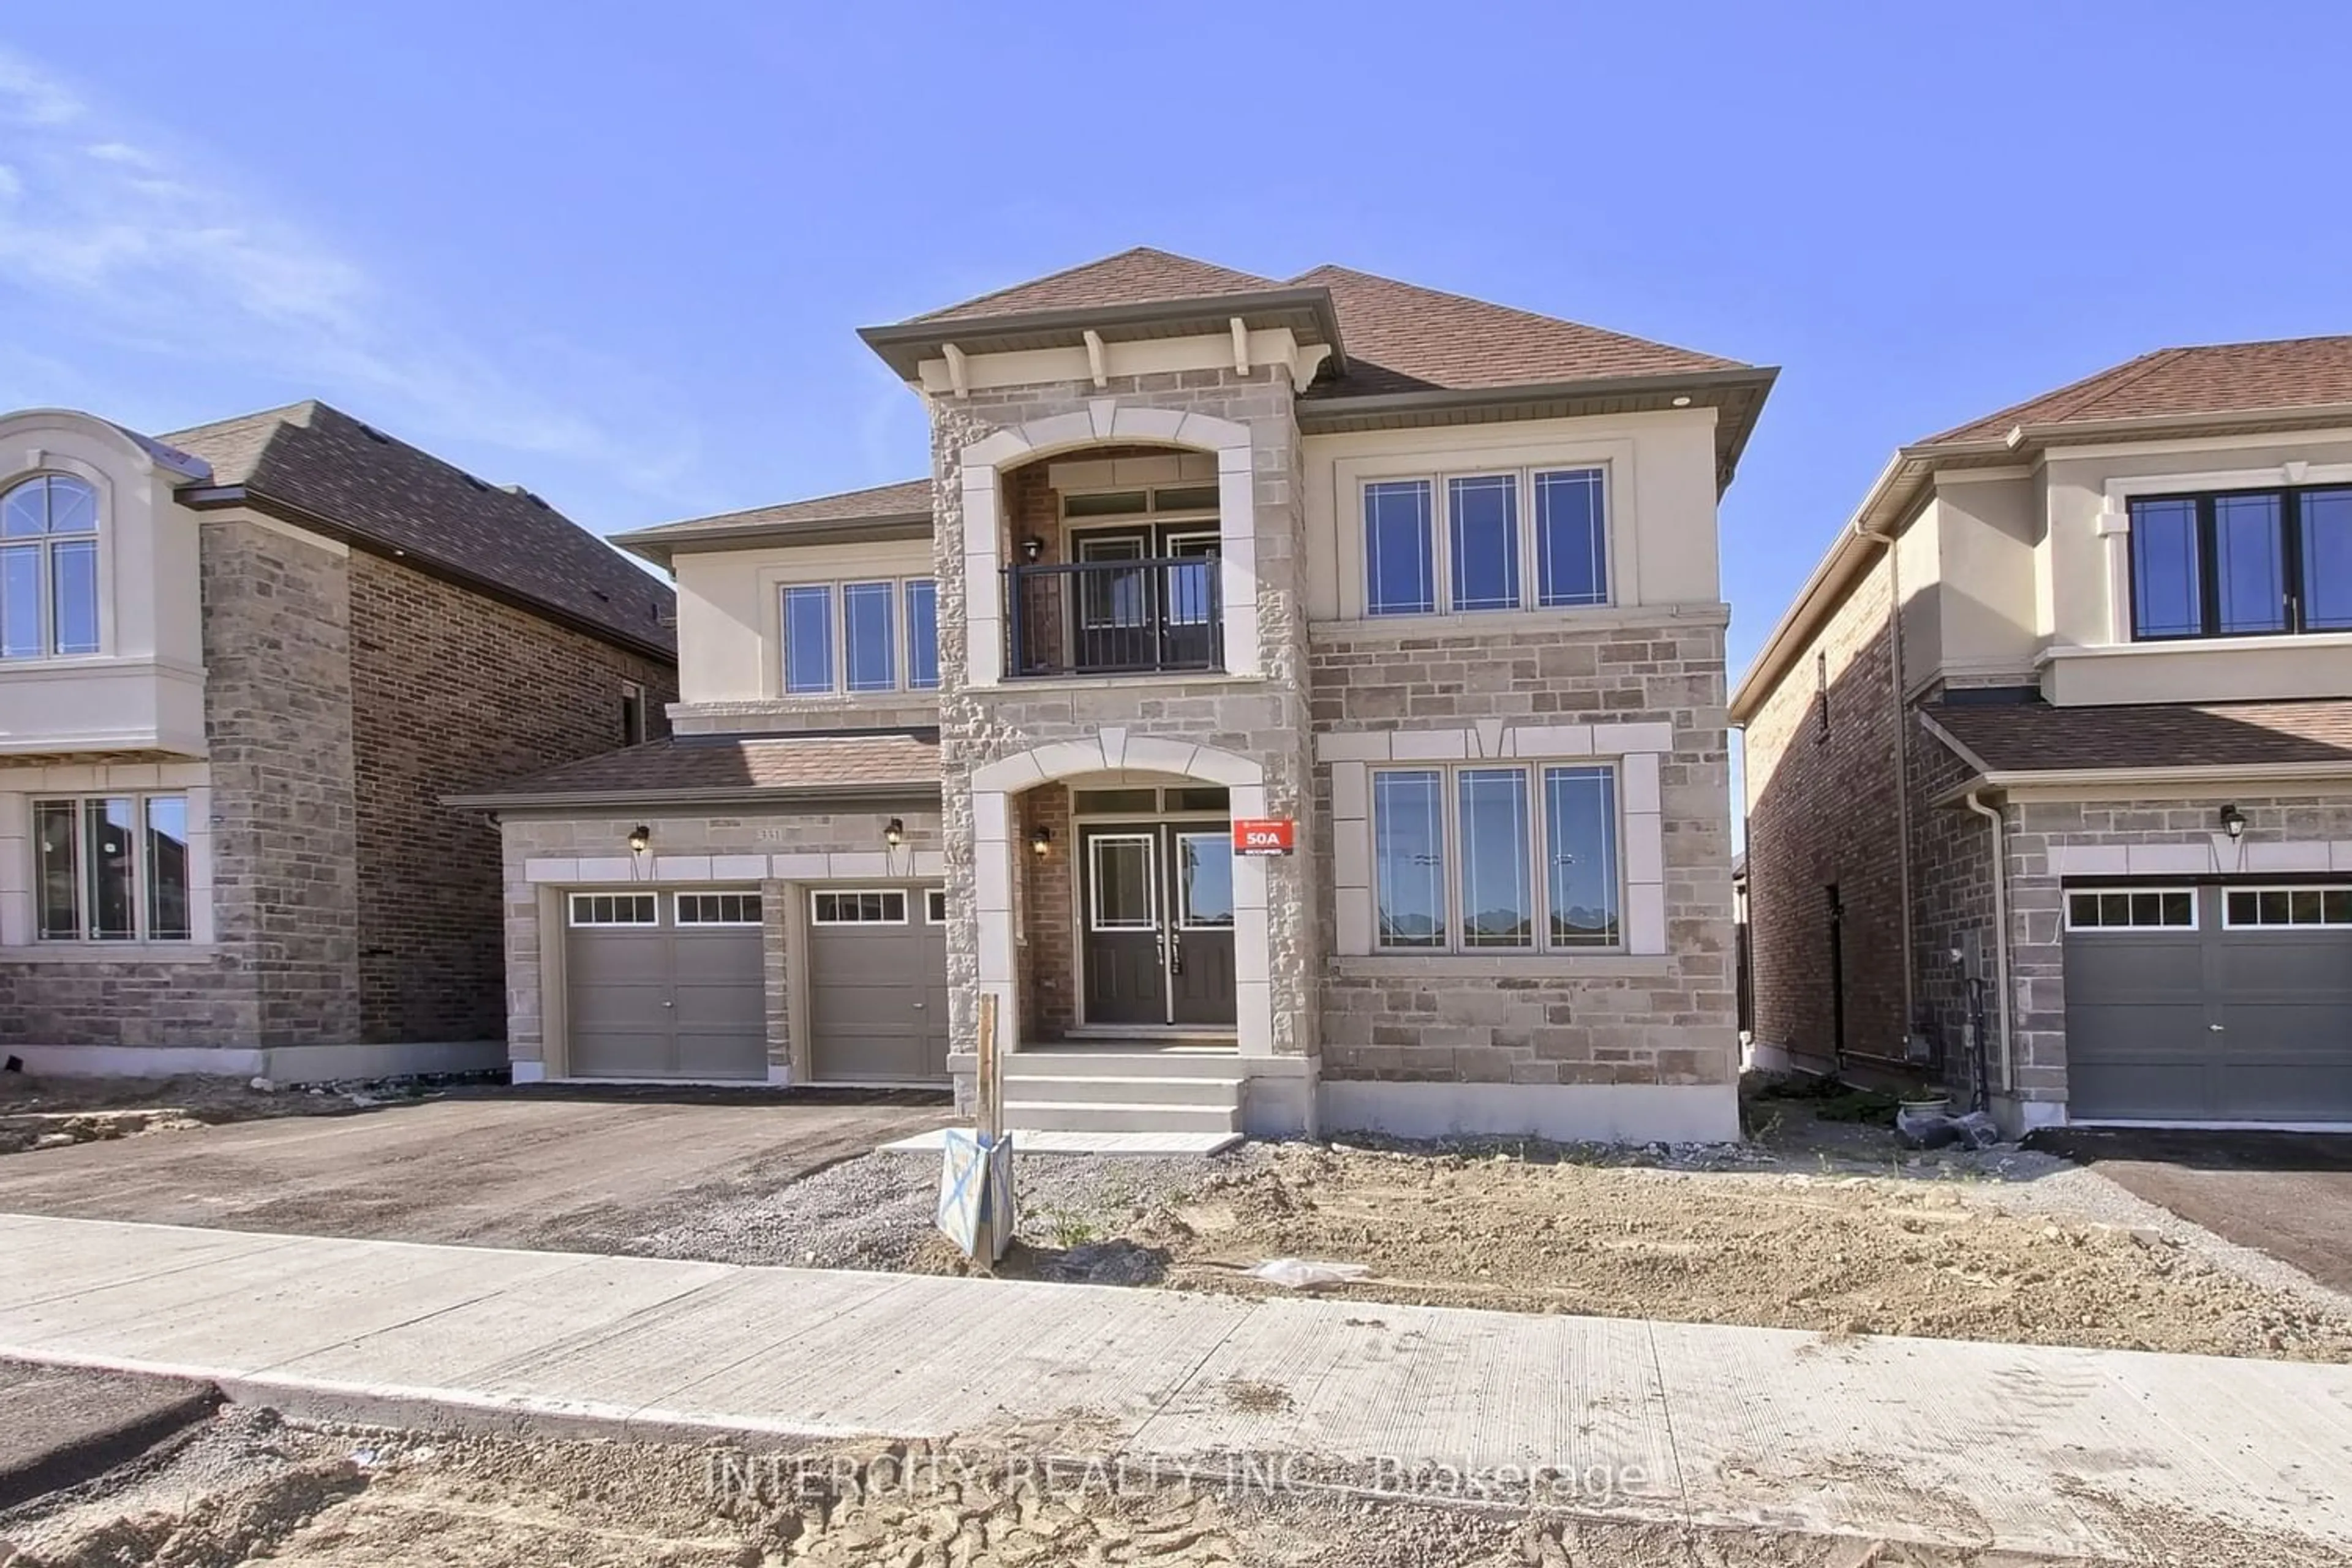 Home with brick exterior material for 331 Seaview Hts, East Gwillimbury Ontario L9N 0Z1